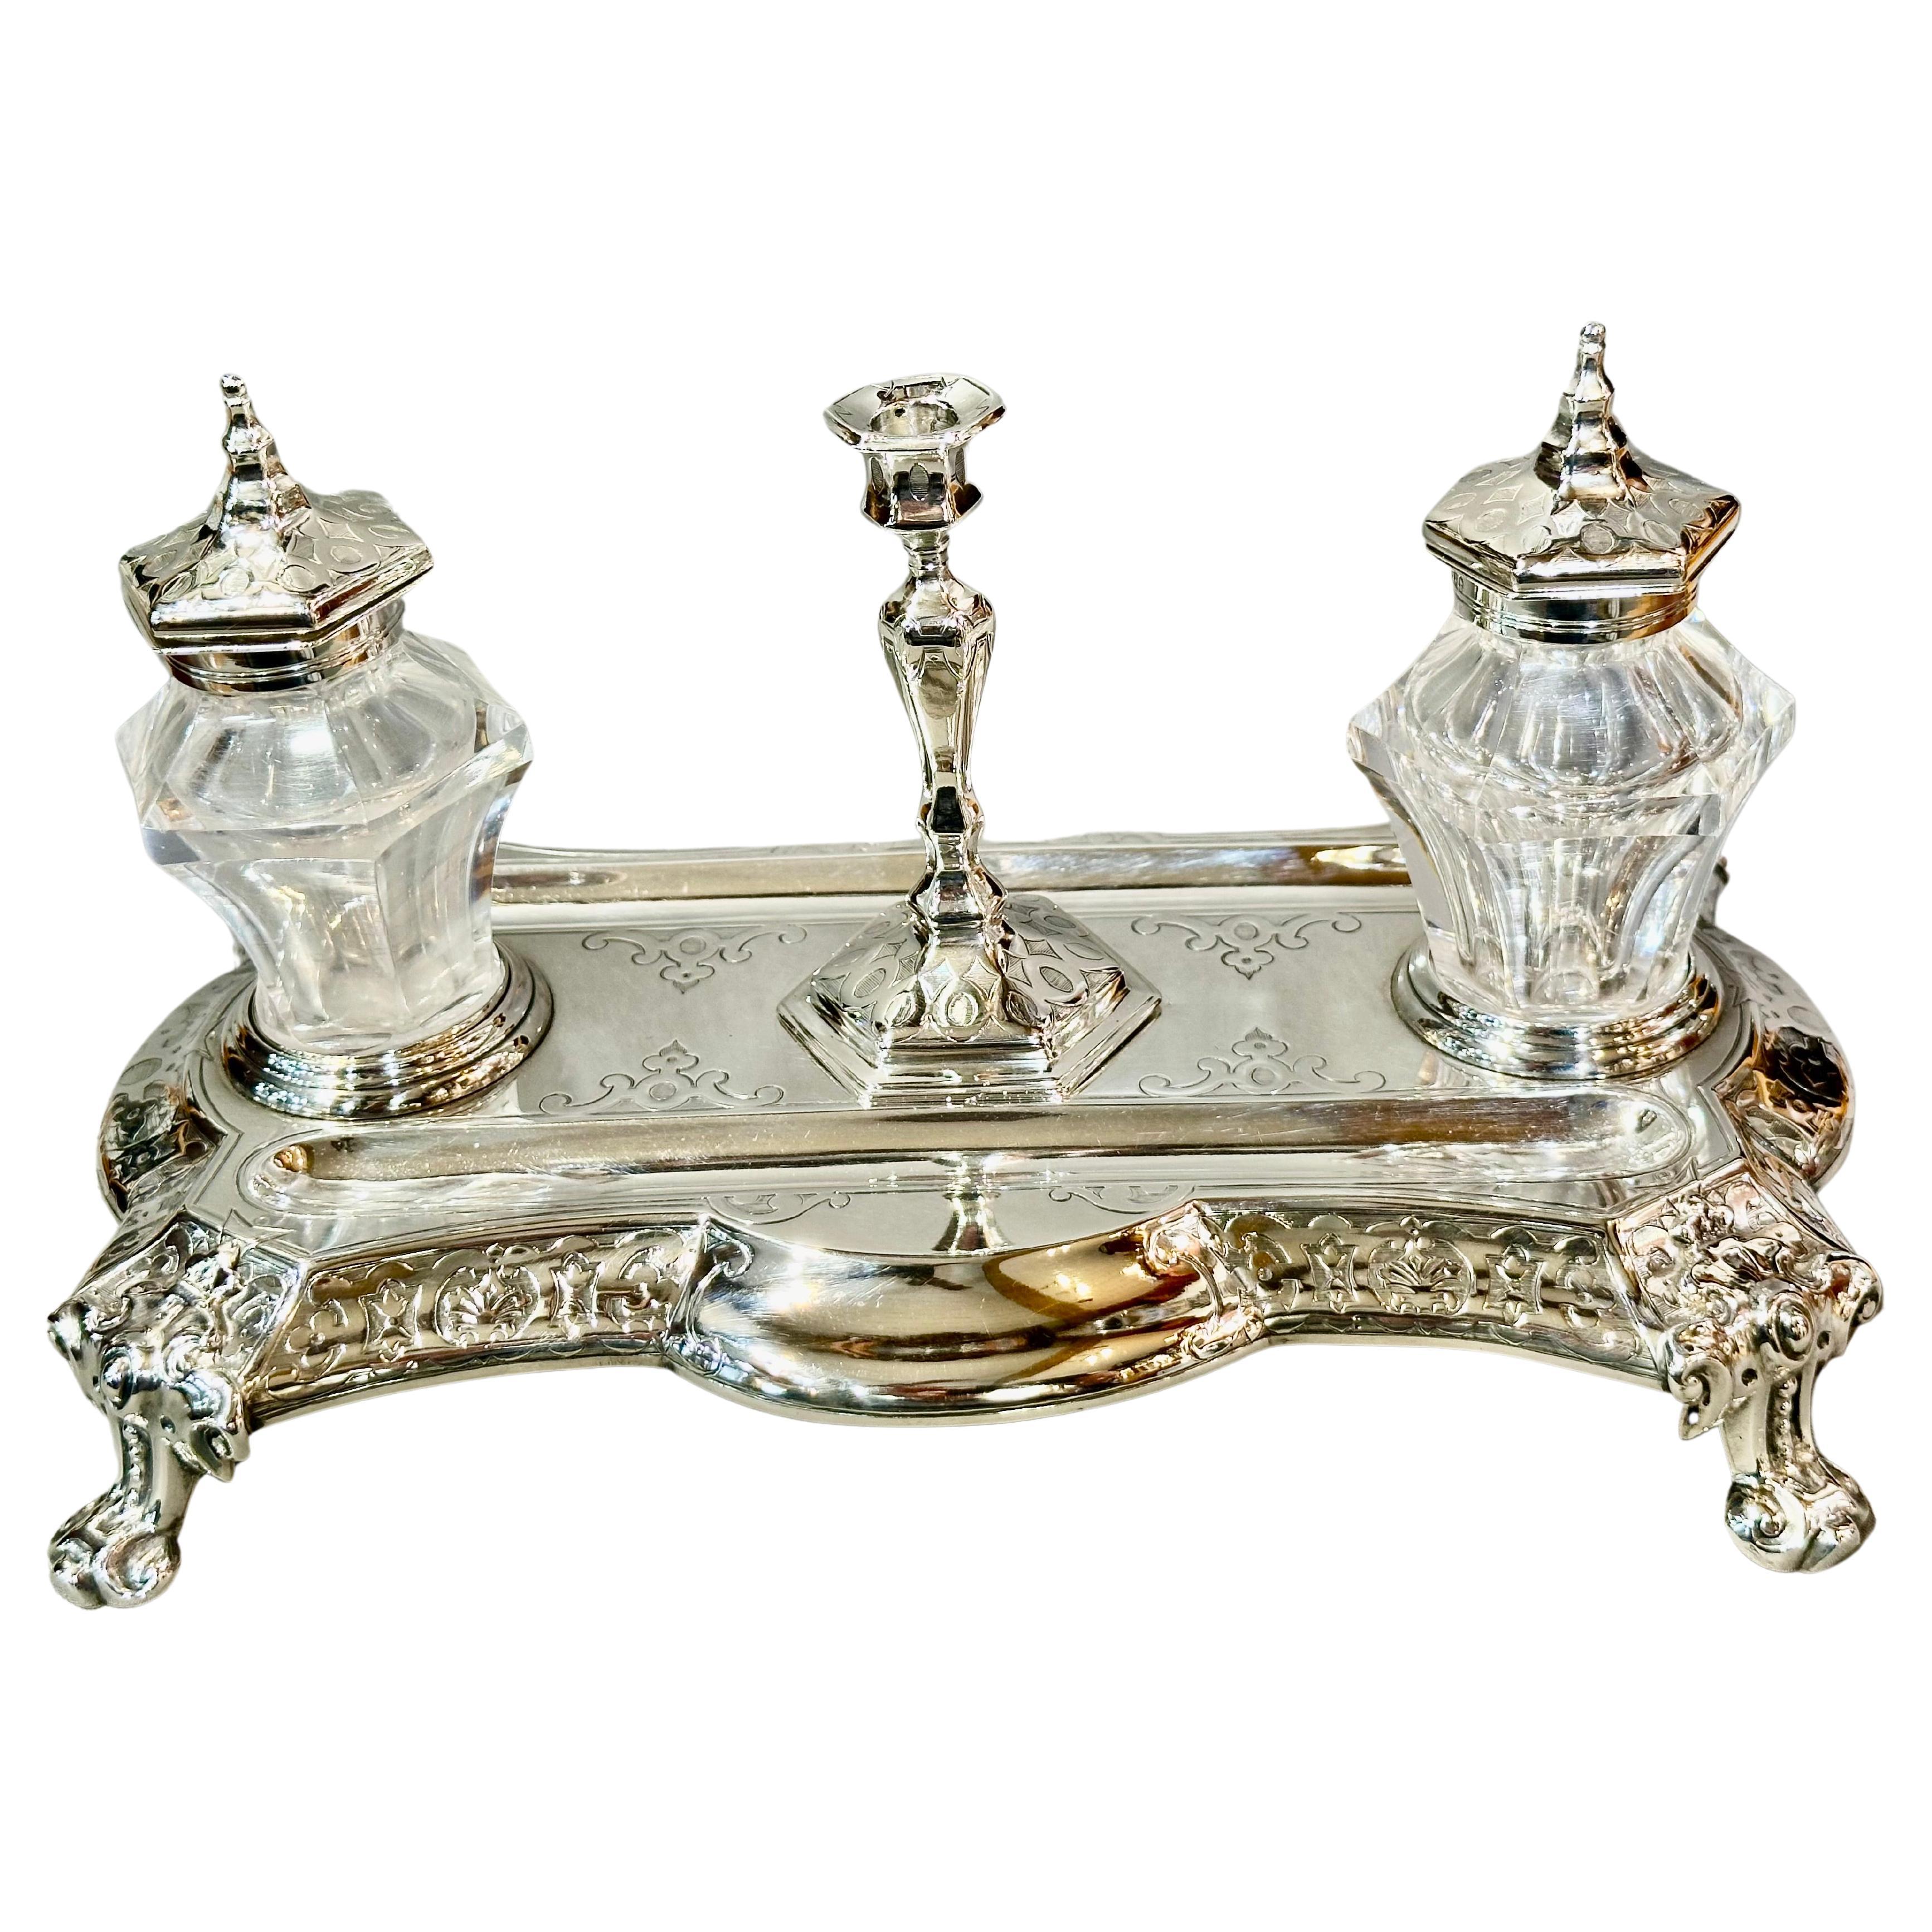  George Richards & Edward Brown English Sterling Silver Glass Inkstand 1862 For Sale